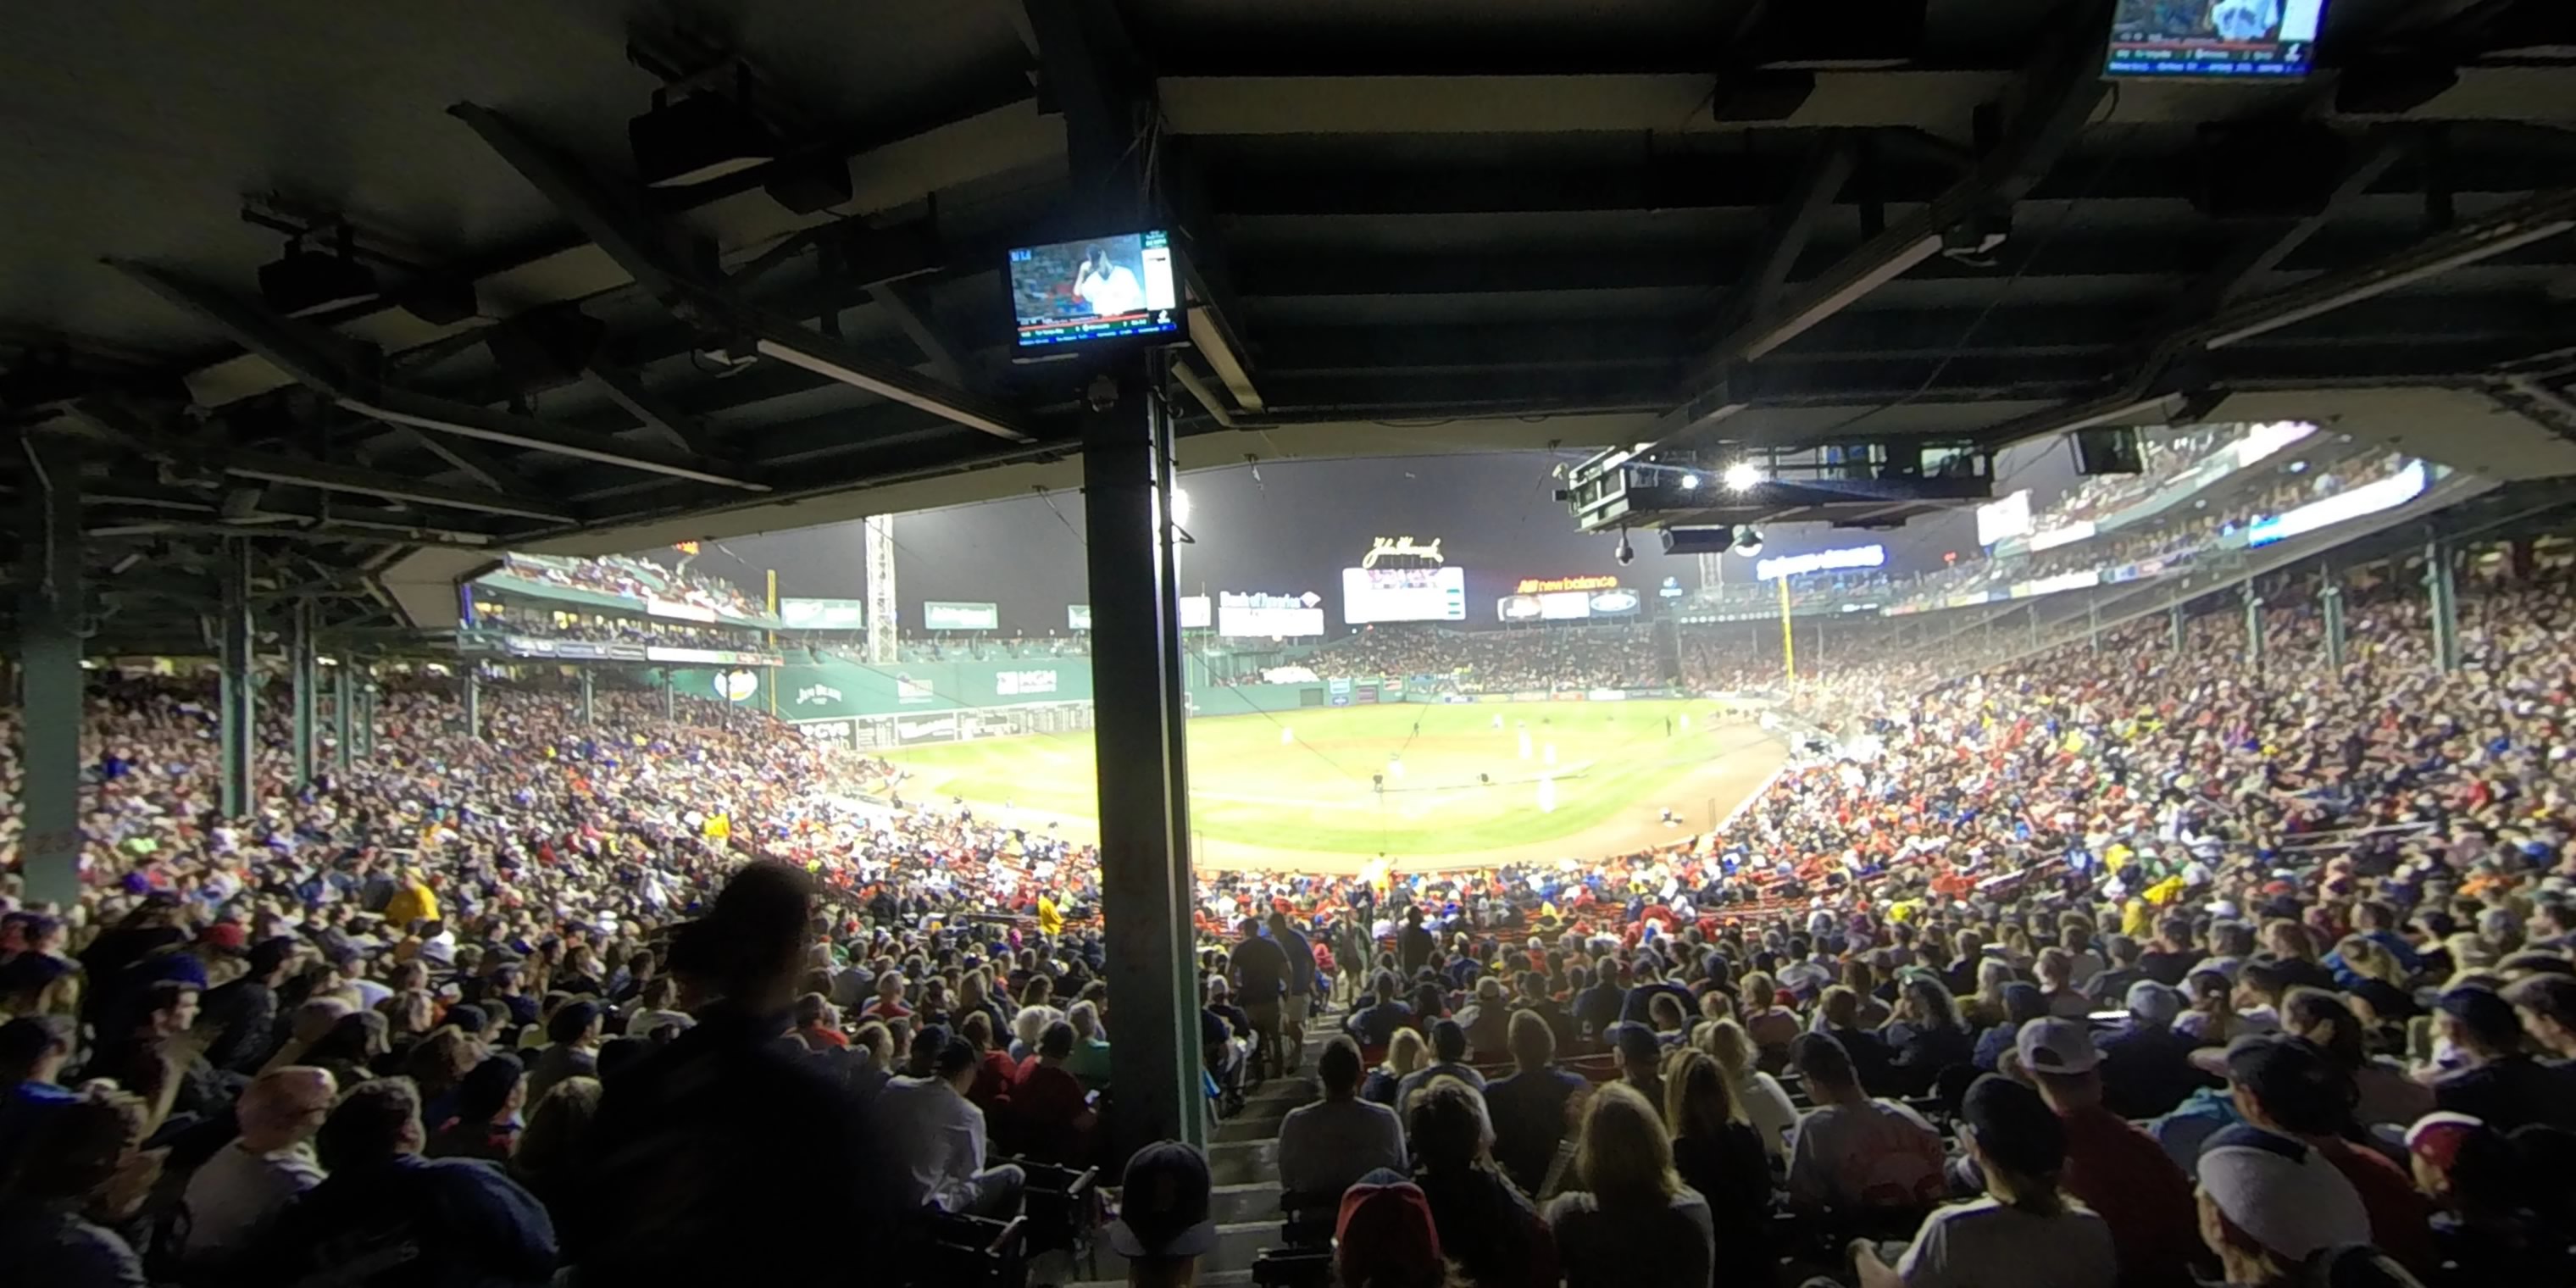 grandstand 21 panoramic seat view  for baseball - fenway park